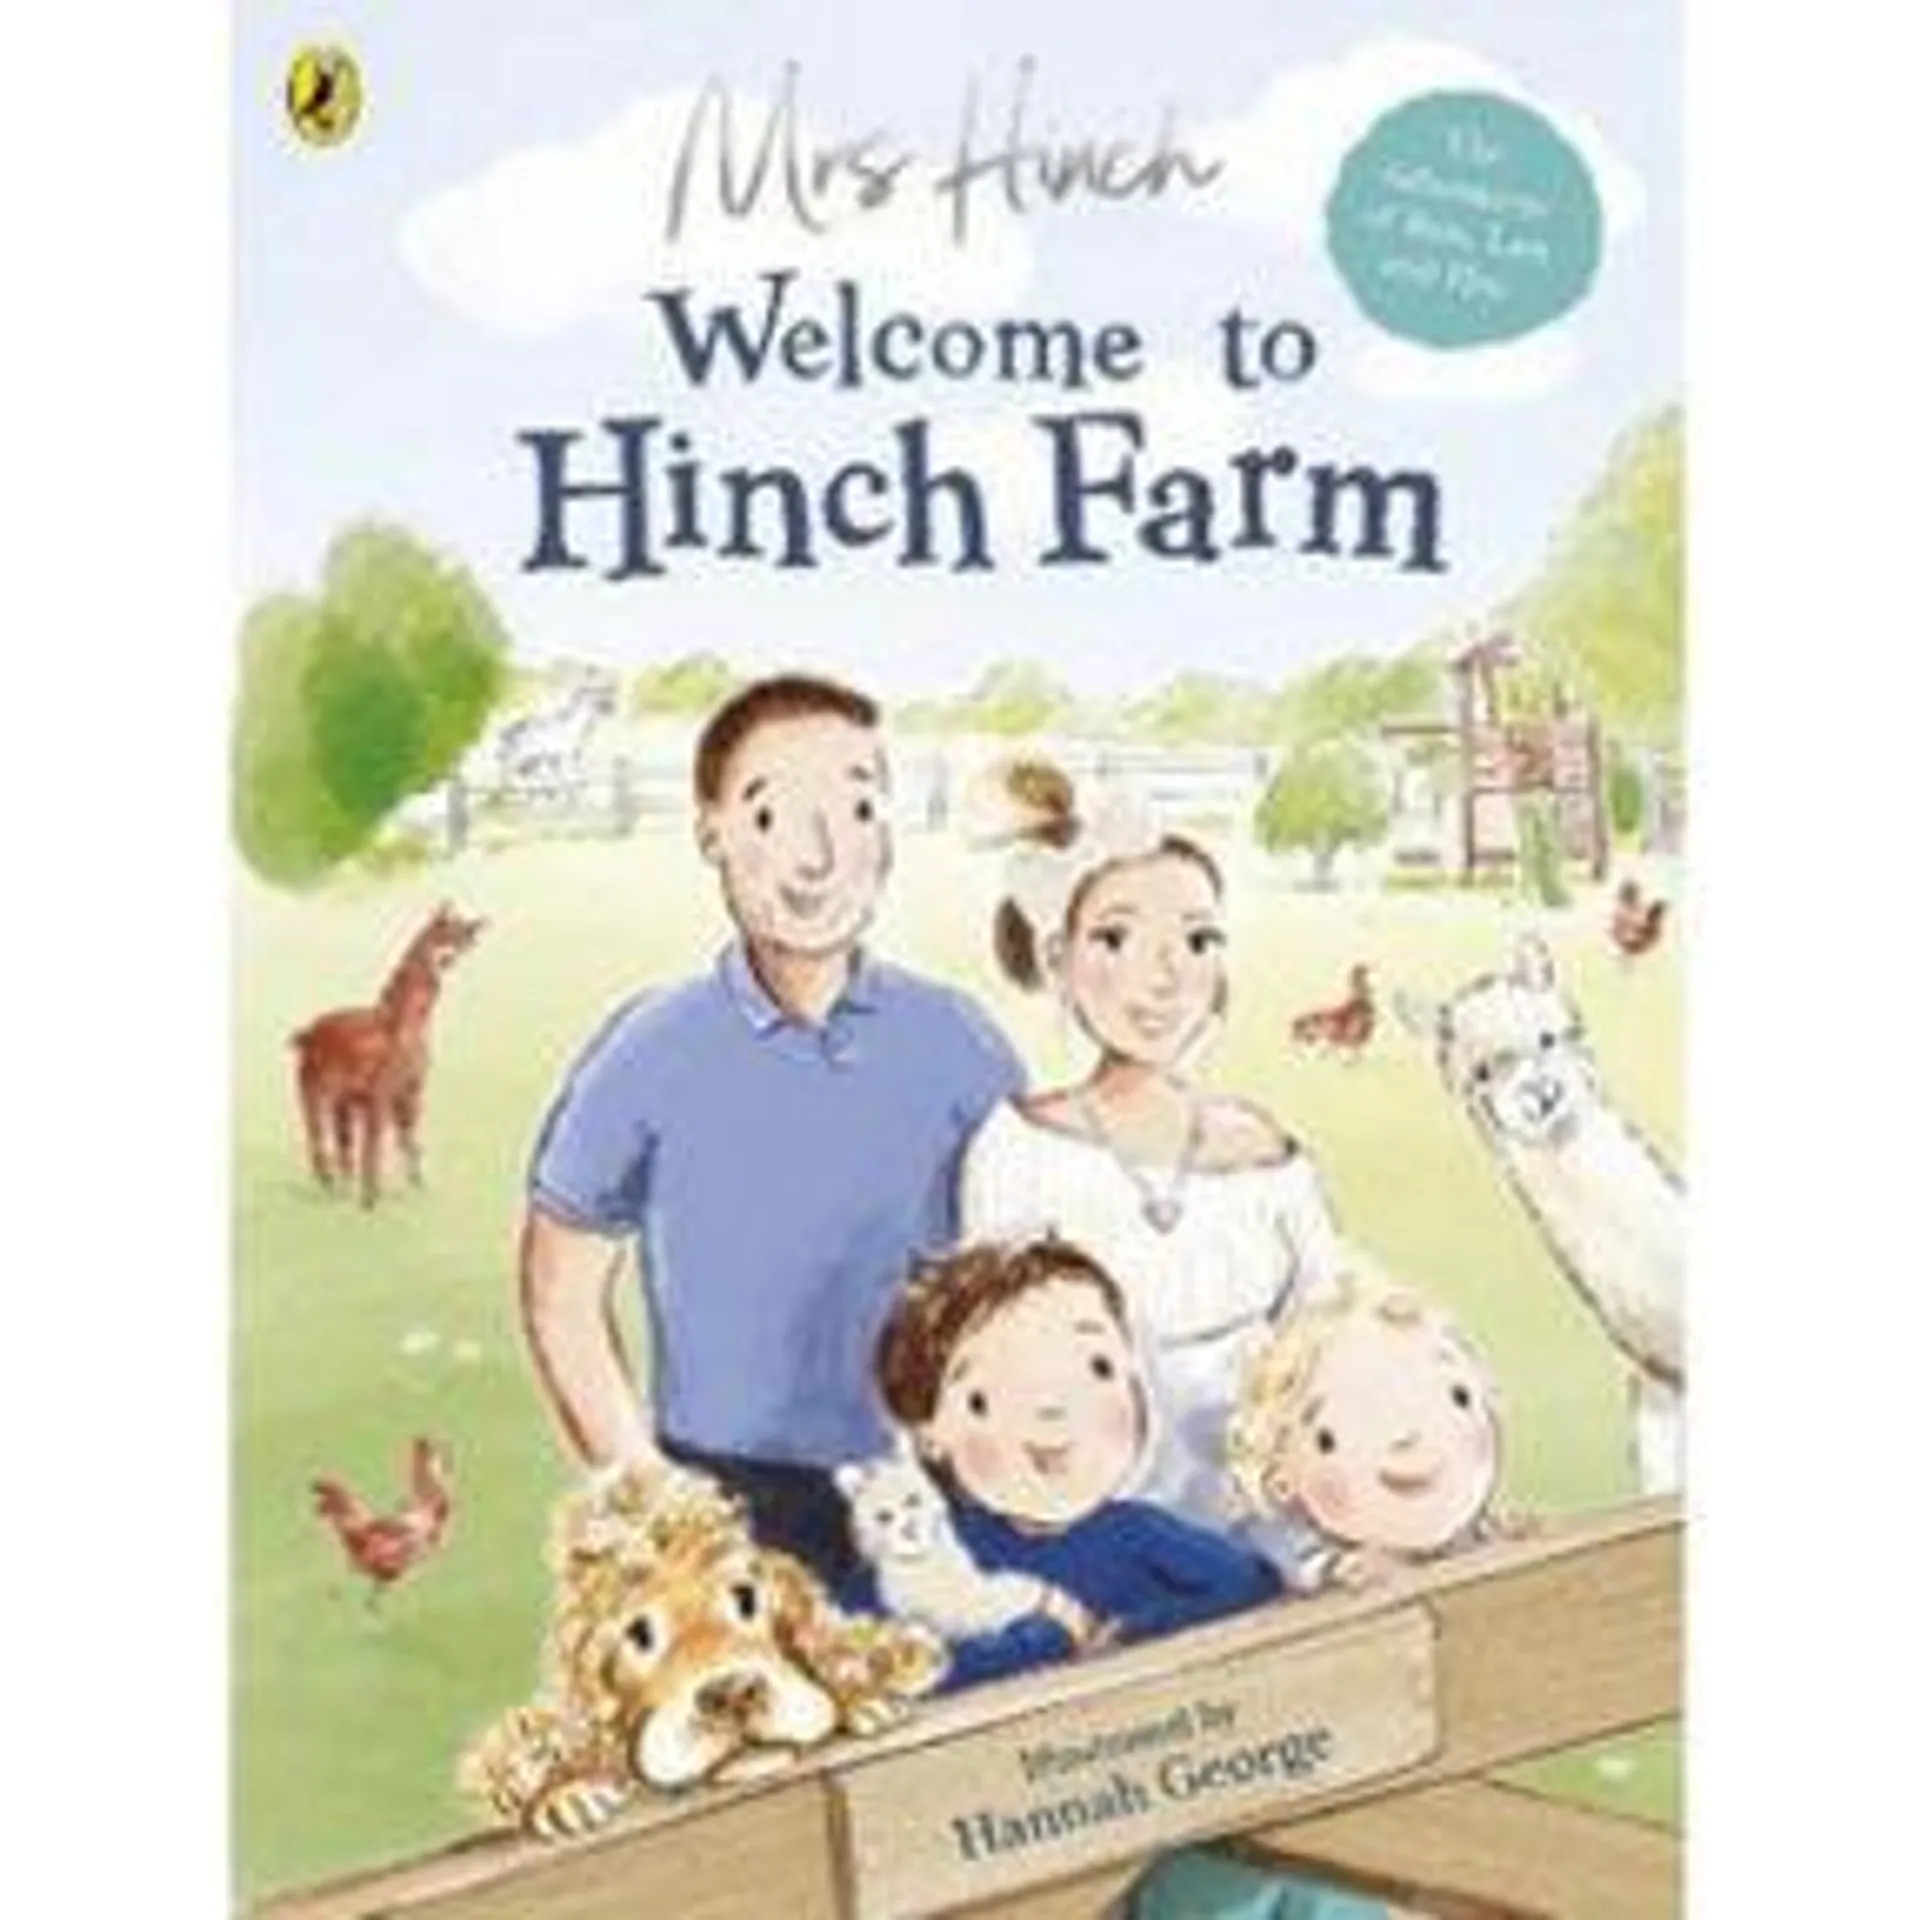 Welcome to Hinch Farm by Mrs Hinch